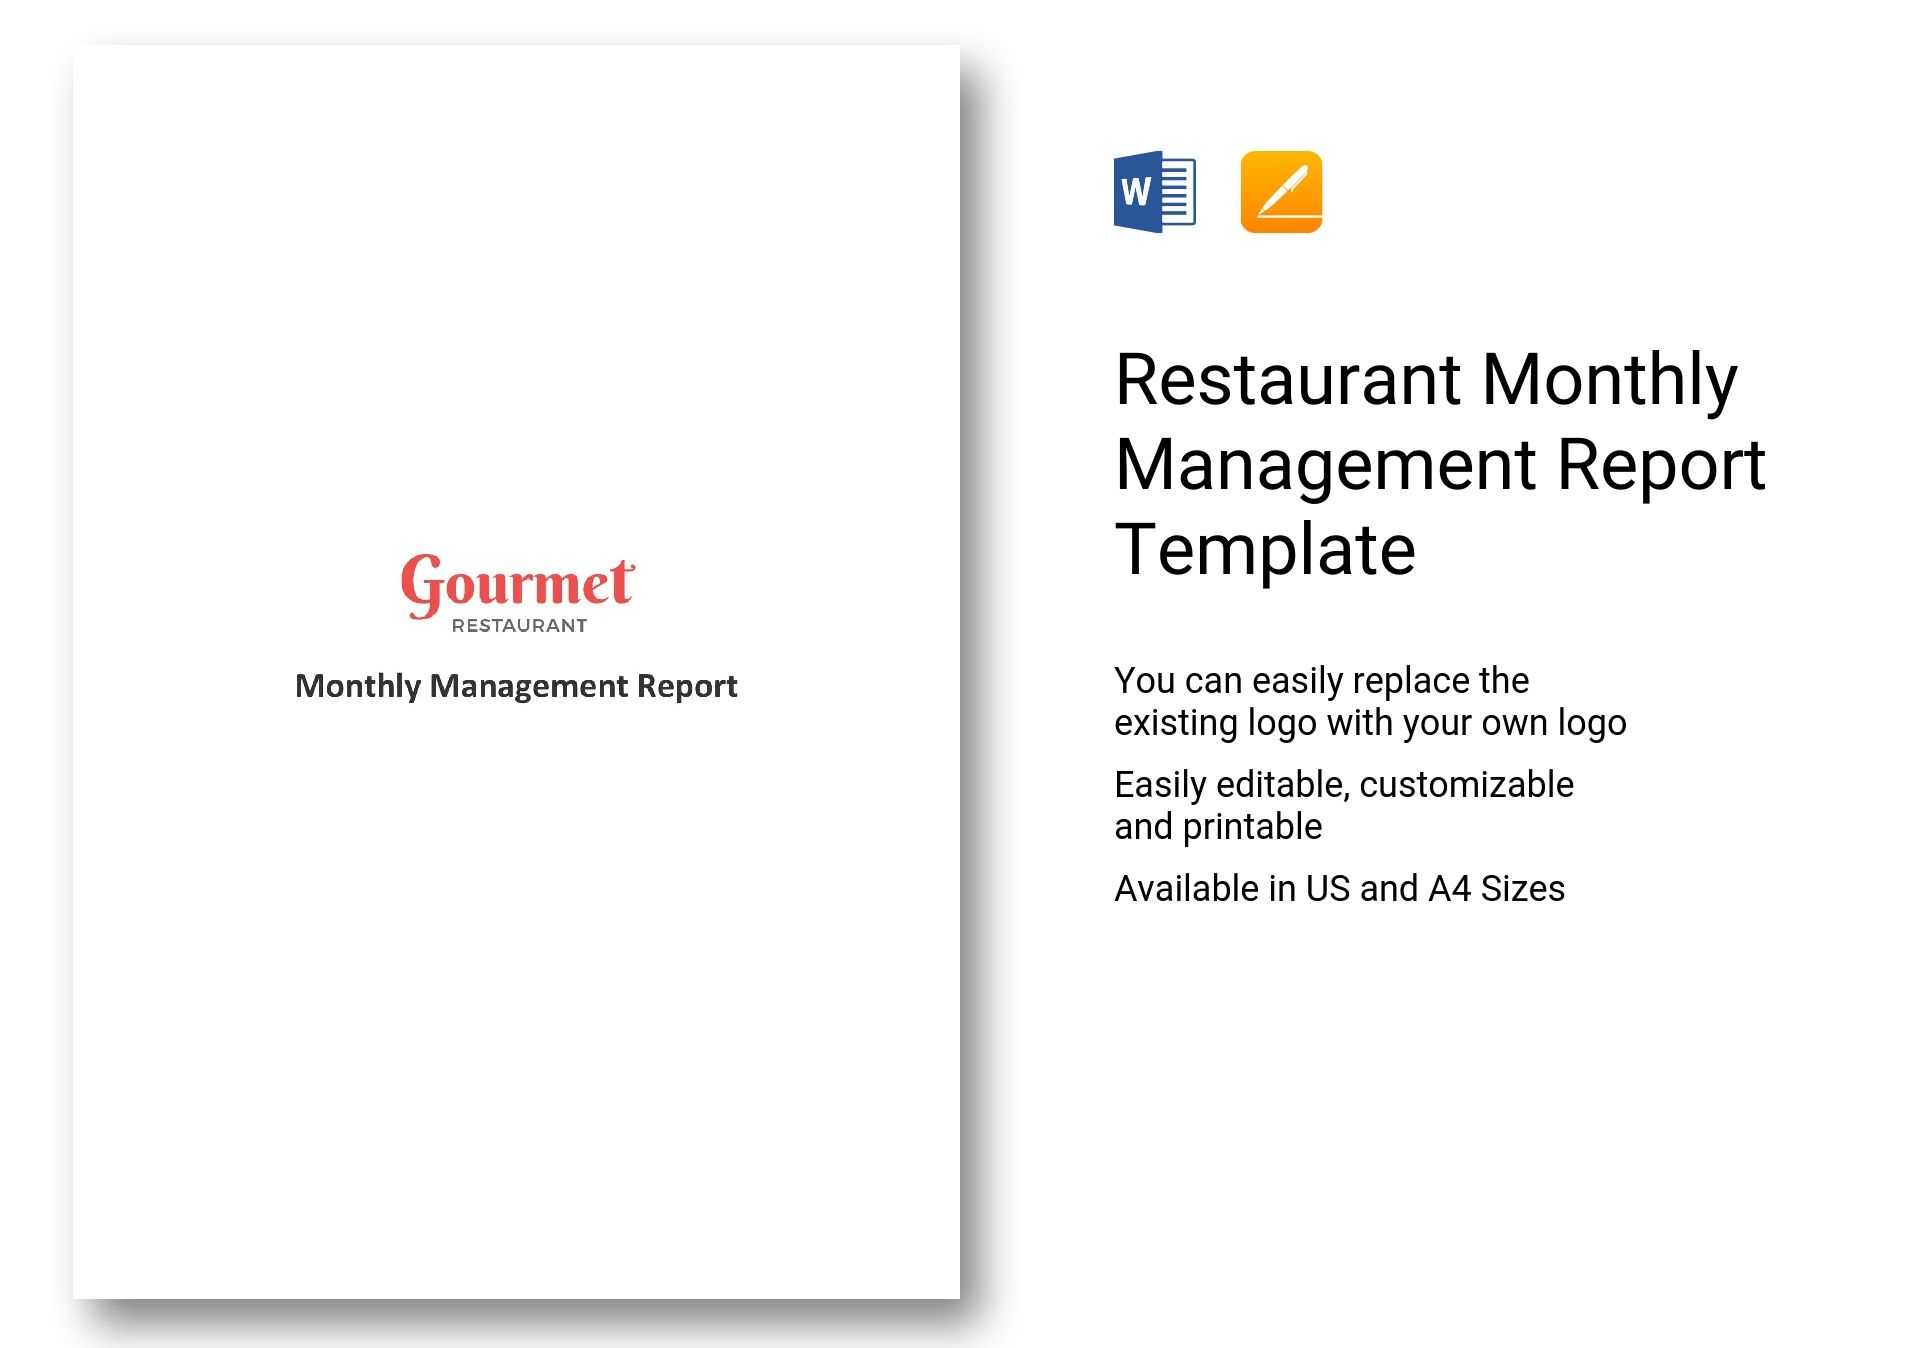 Restaurant Monthly Management Report Template In Word, Apple Regarding It Management Report Template